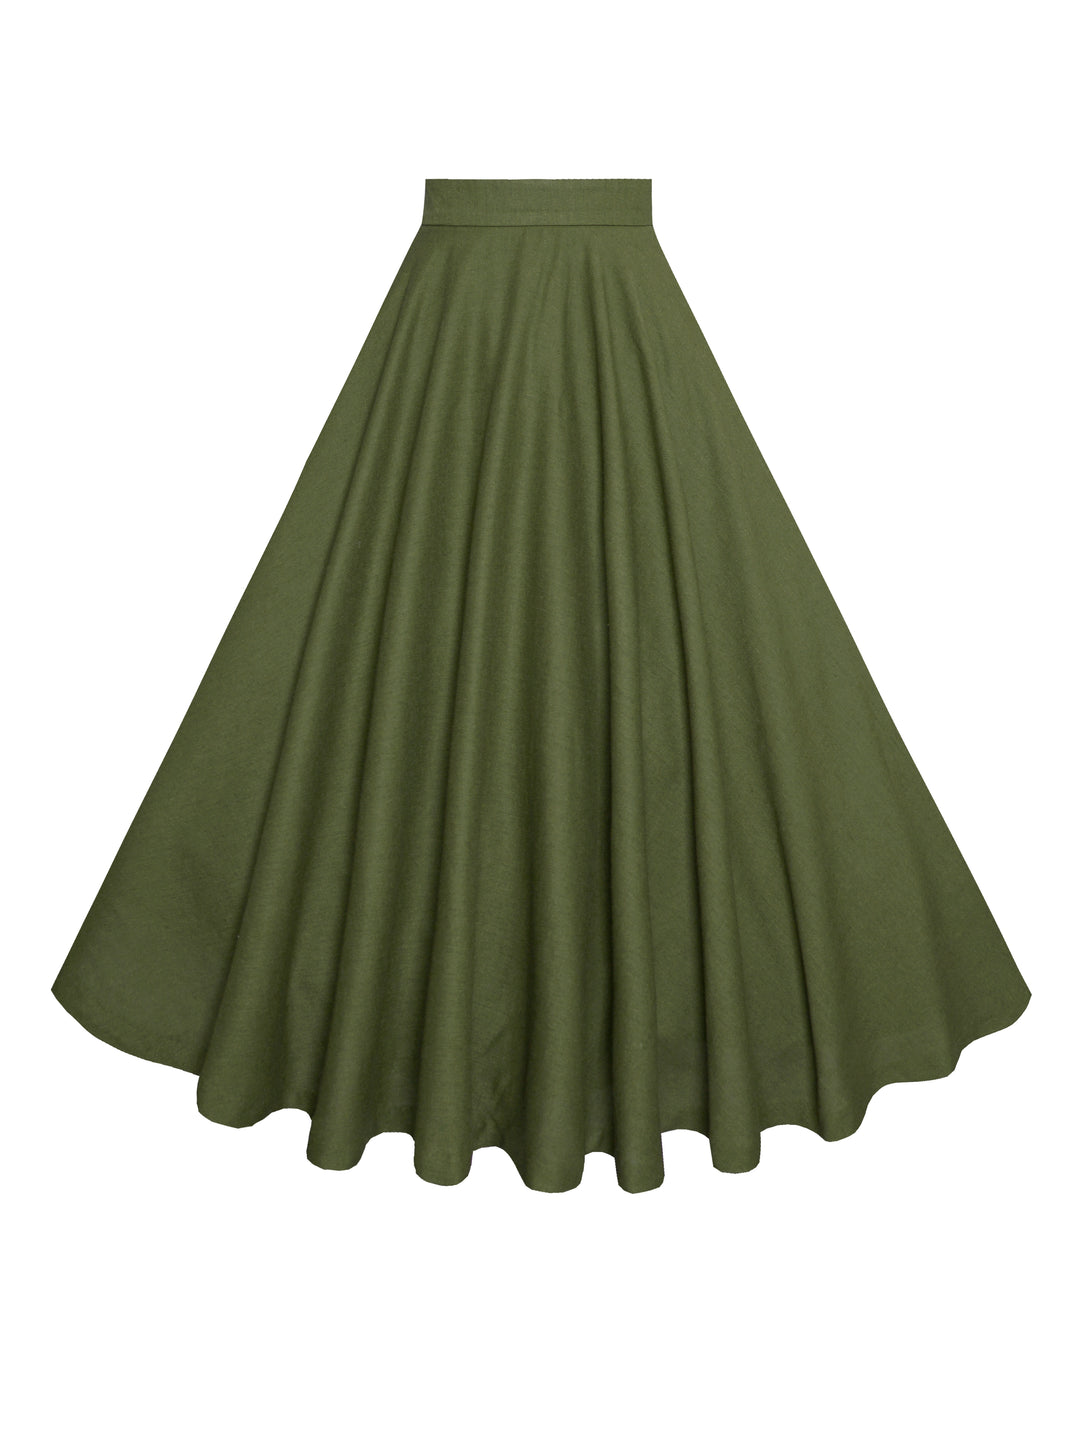 MTO - Lindy Skirt in Hunters Green Linen